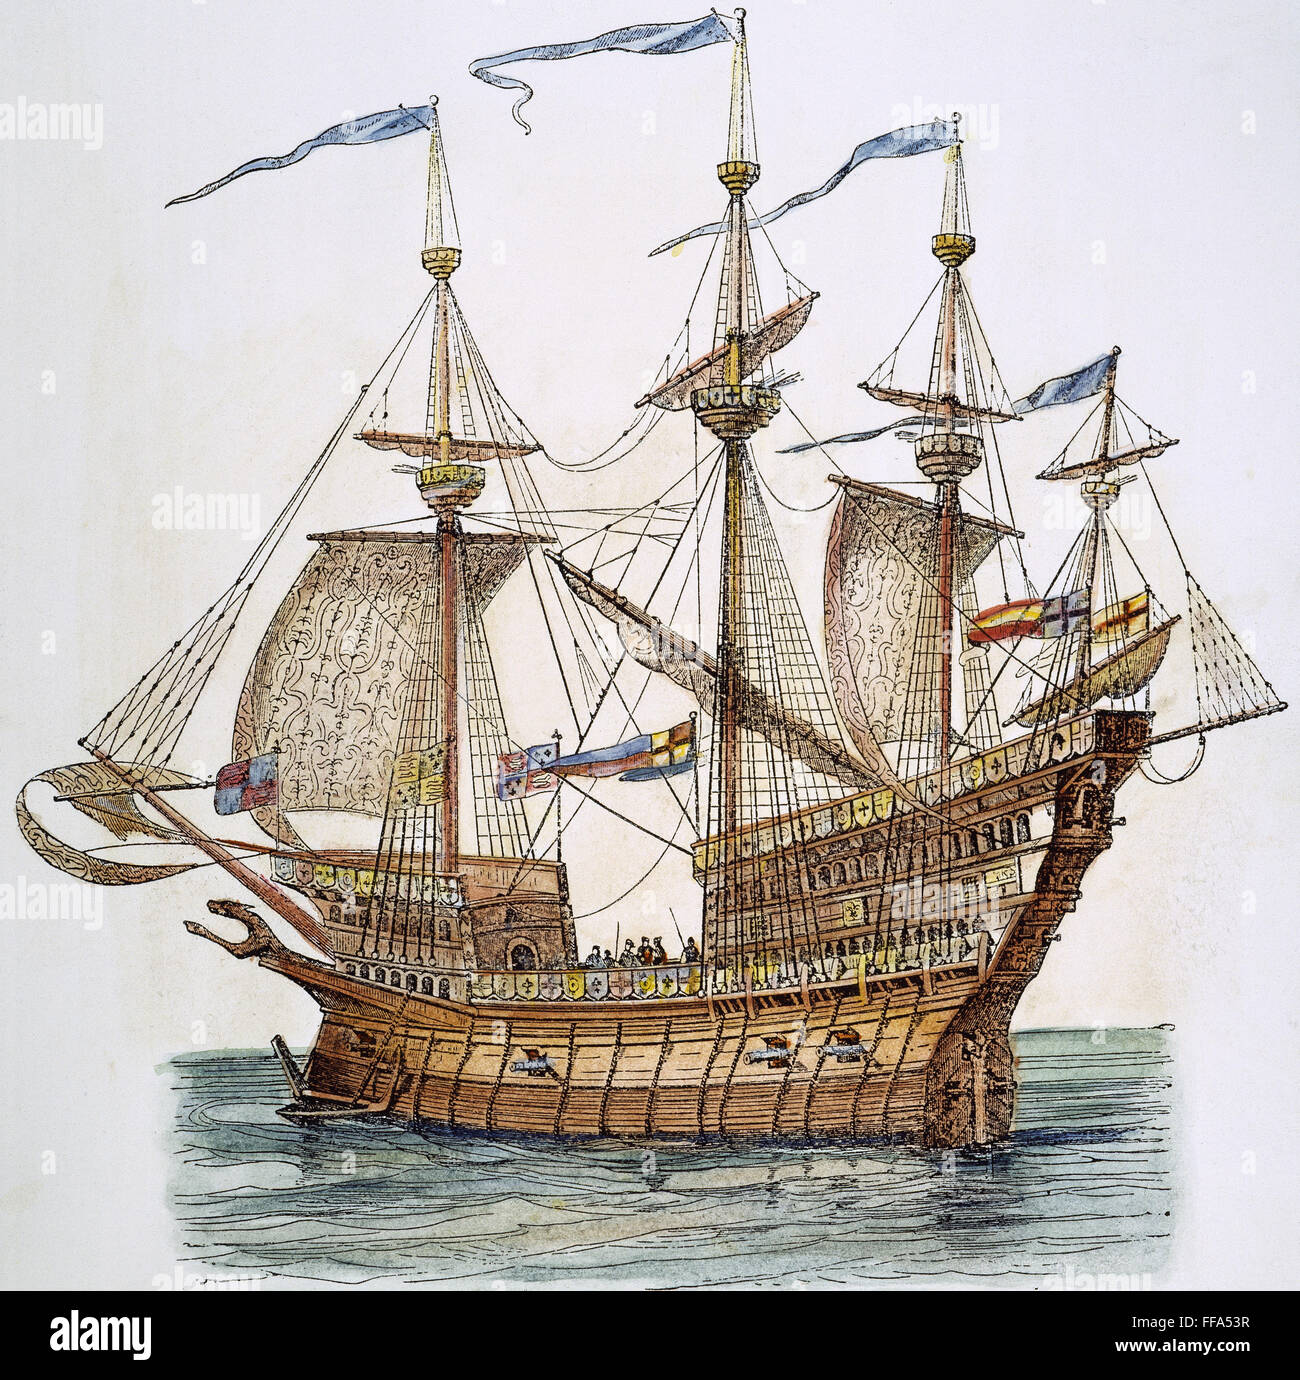 POSTCARD SAILING VESSELS BRITISH FRIGATE DURING THE NAPOLENIC WARS 